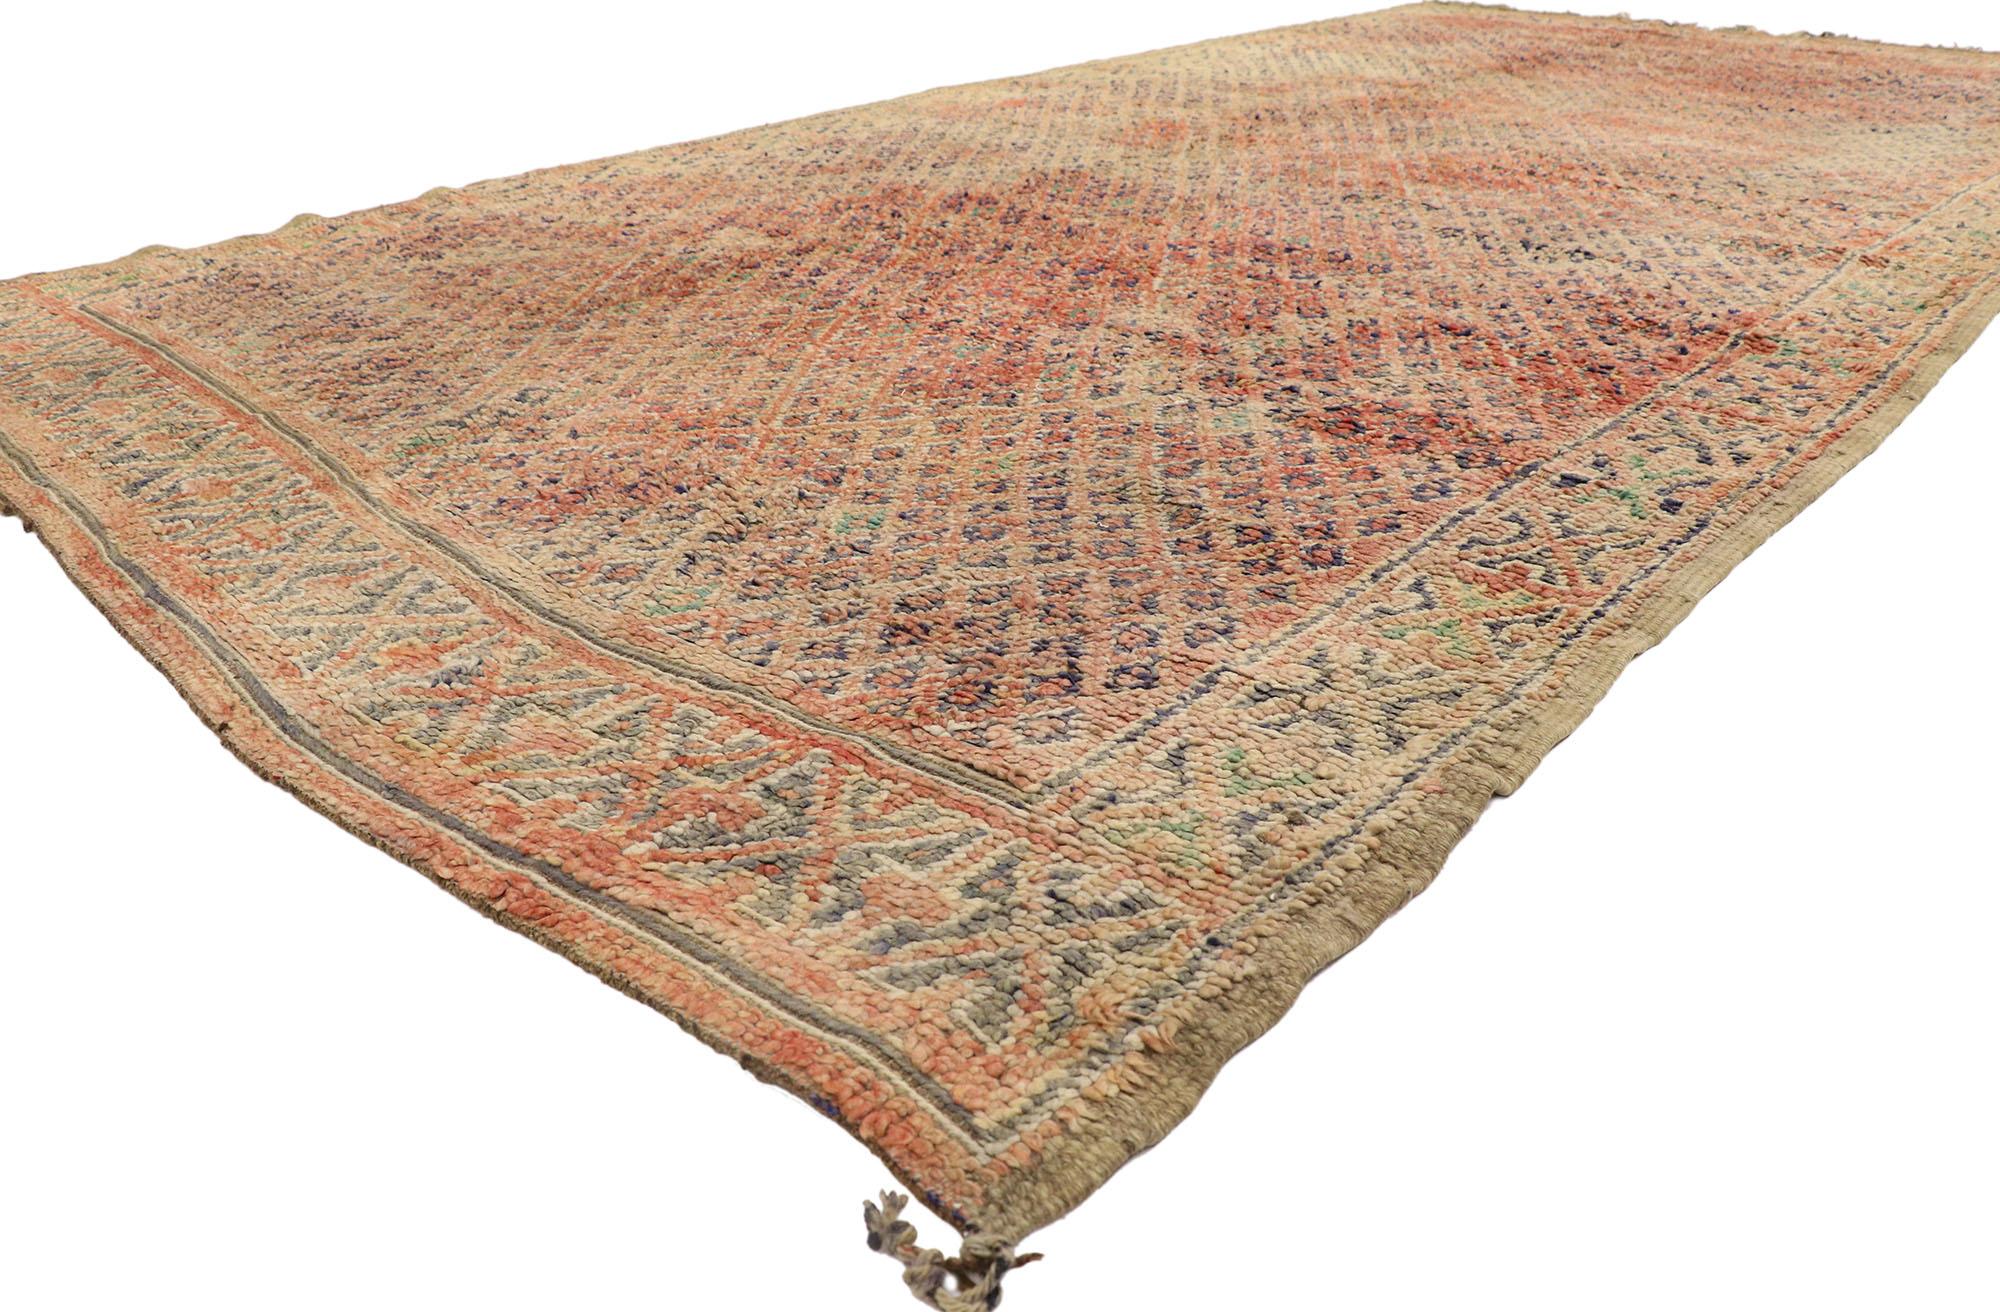 21438 Vintage Beni MGuild Moroccan Rug, 08'05 x 12'01. Originating from the Beni M'Guild tribe nestled in Morocco's Middle Atlas Mountains, Beni M'Guild rugs epitomize a cherished tradition meticulously handcrafted by skilled Berber women. These